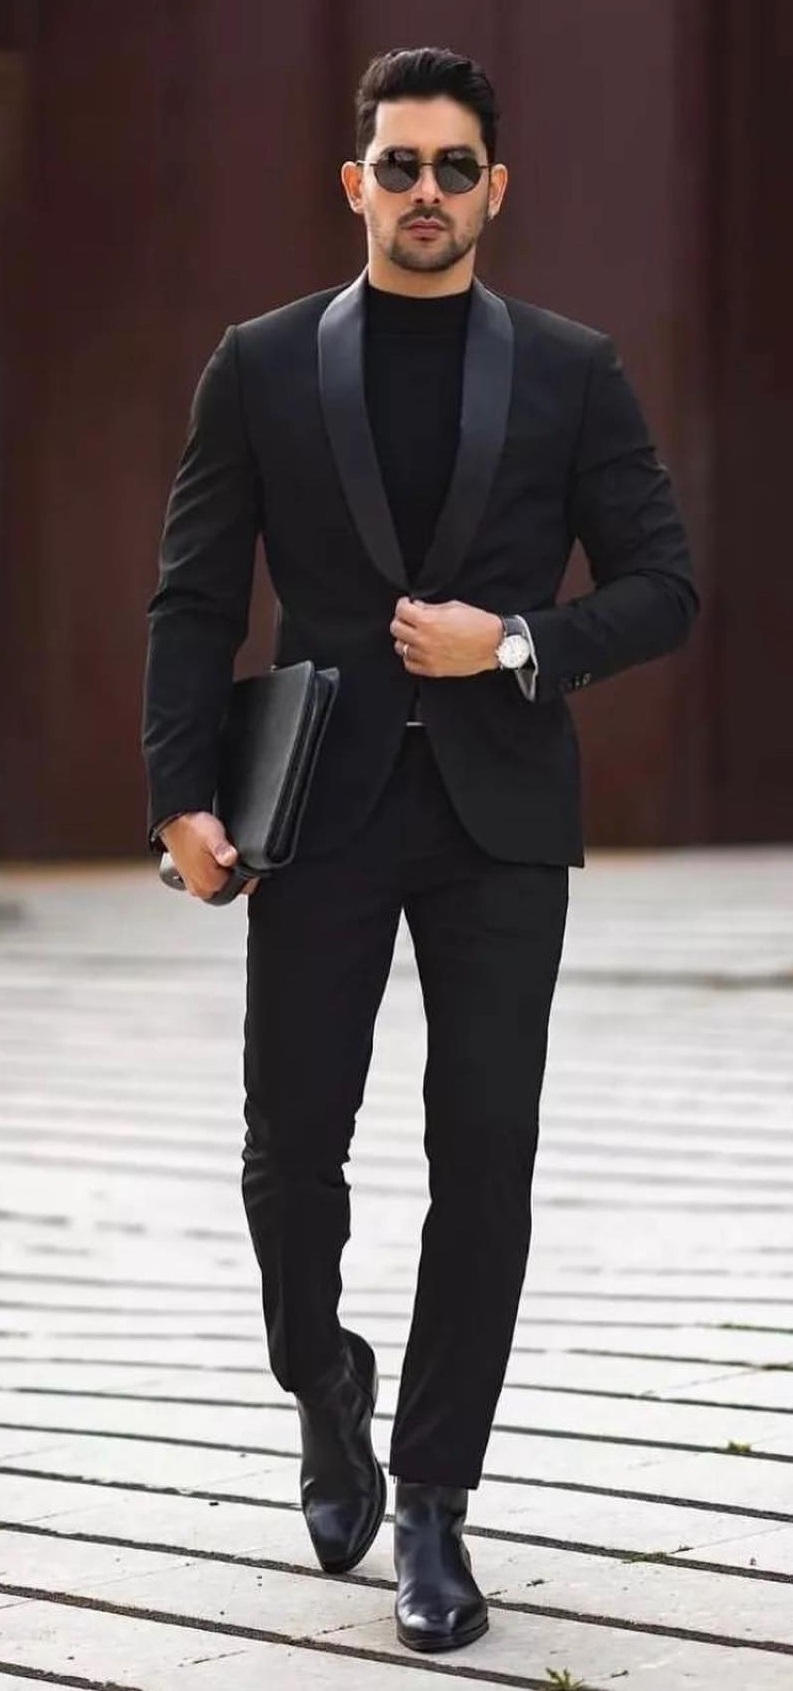 Own a suit to create a stand out style. - Mens Styling tips